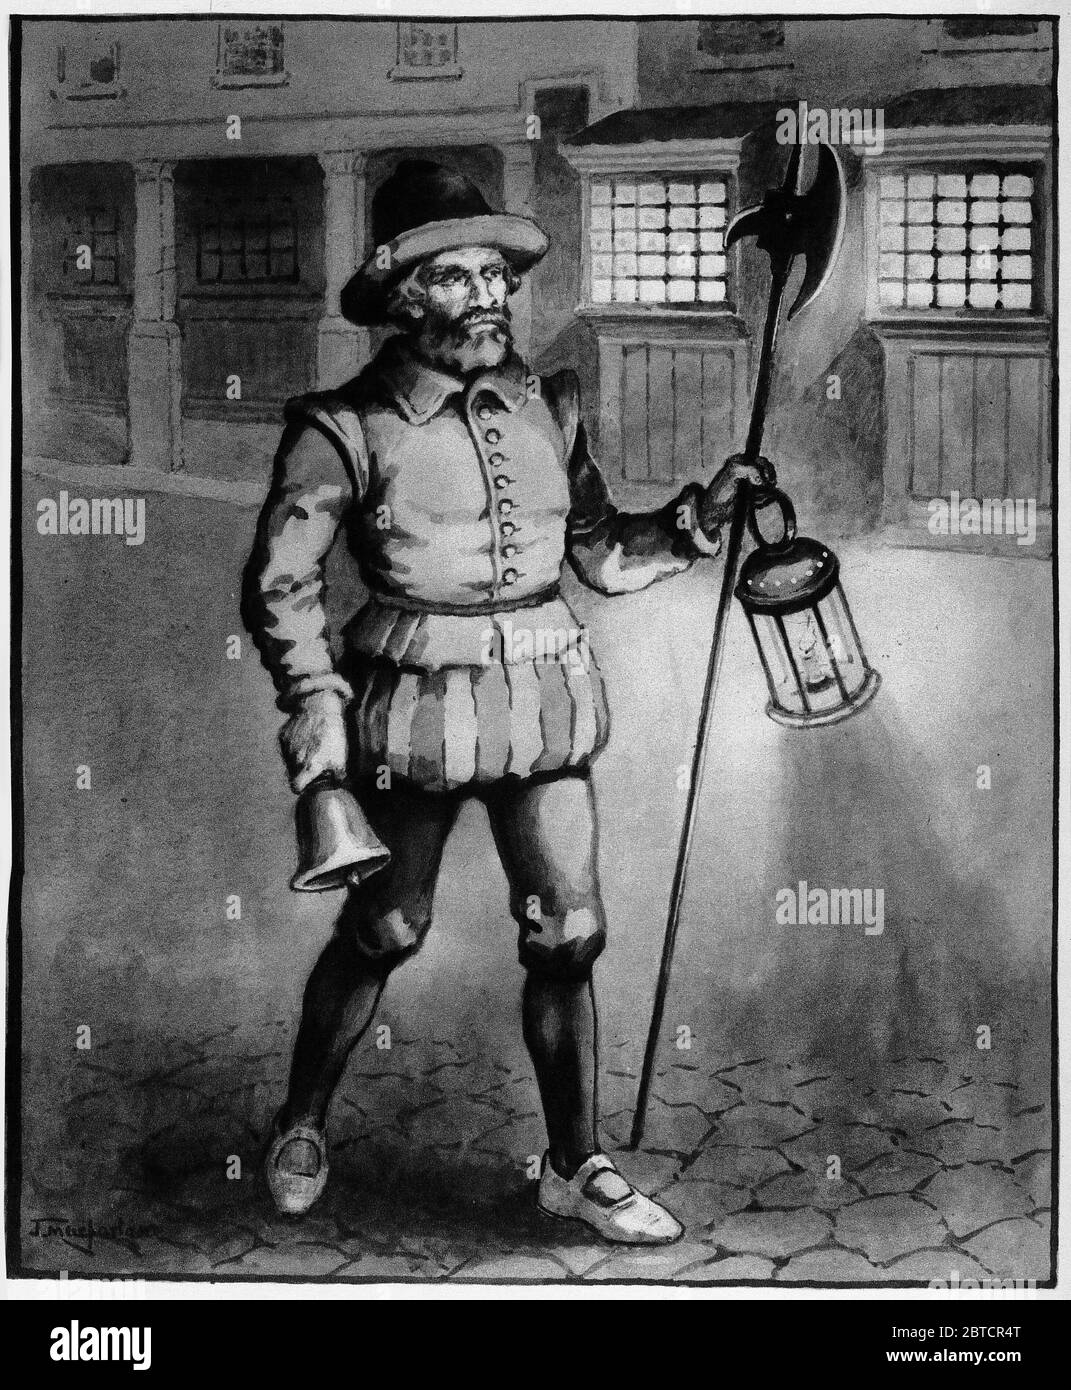 illustration of a night watchman, common in old European towns and cities, from a set of school posters used for social studies, c 1930 Stock Photo